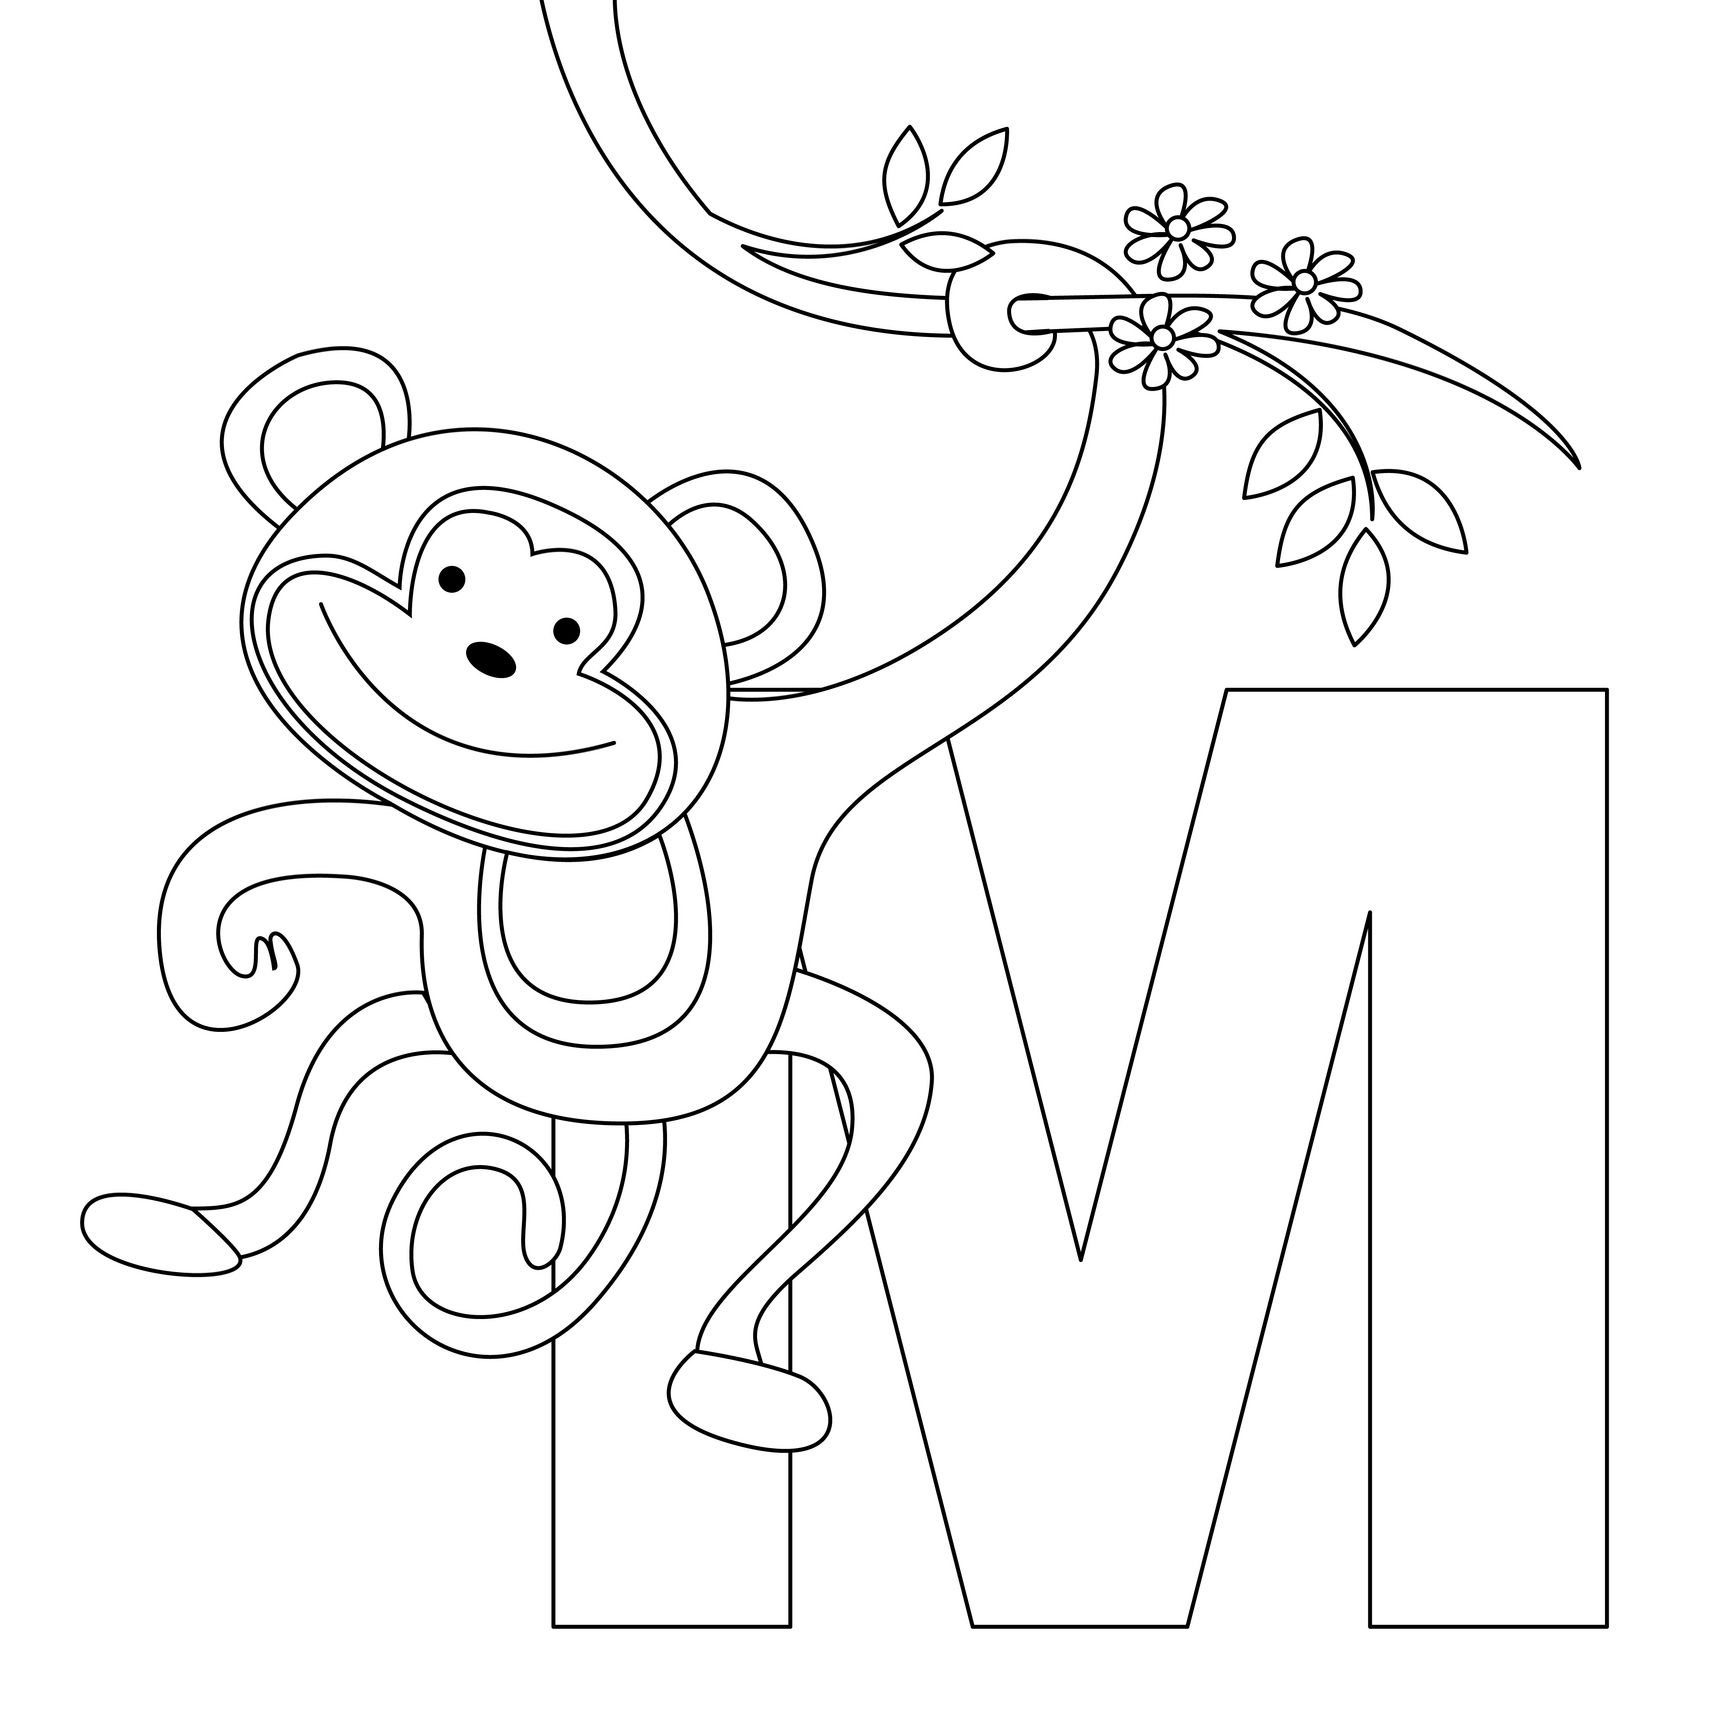 animal-alphabet-coloring-pages-at-getcolorings-free-printable-colorings-pages-to-print-and